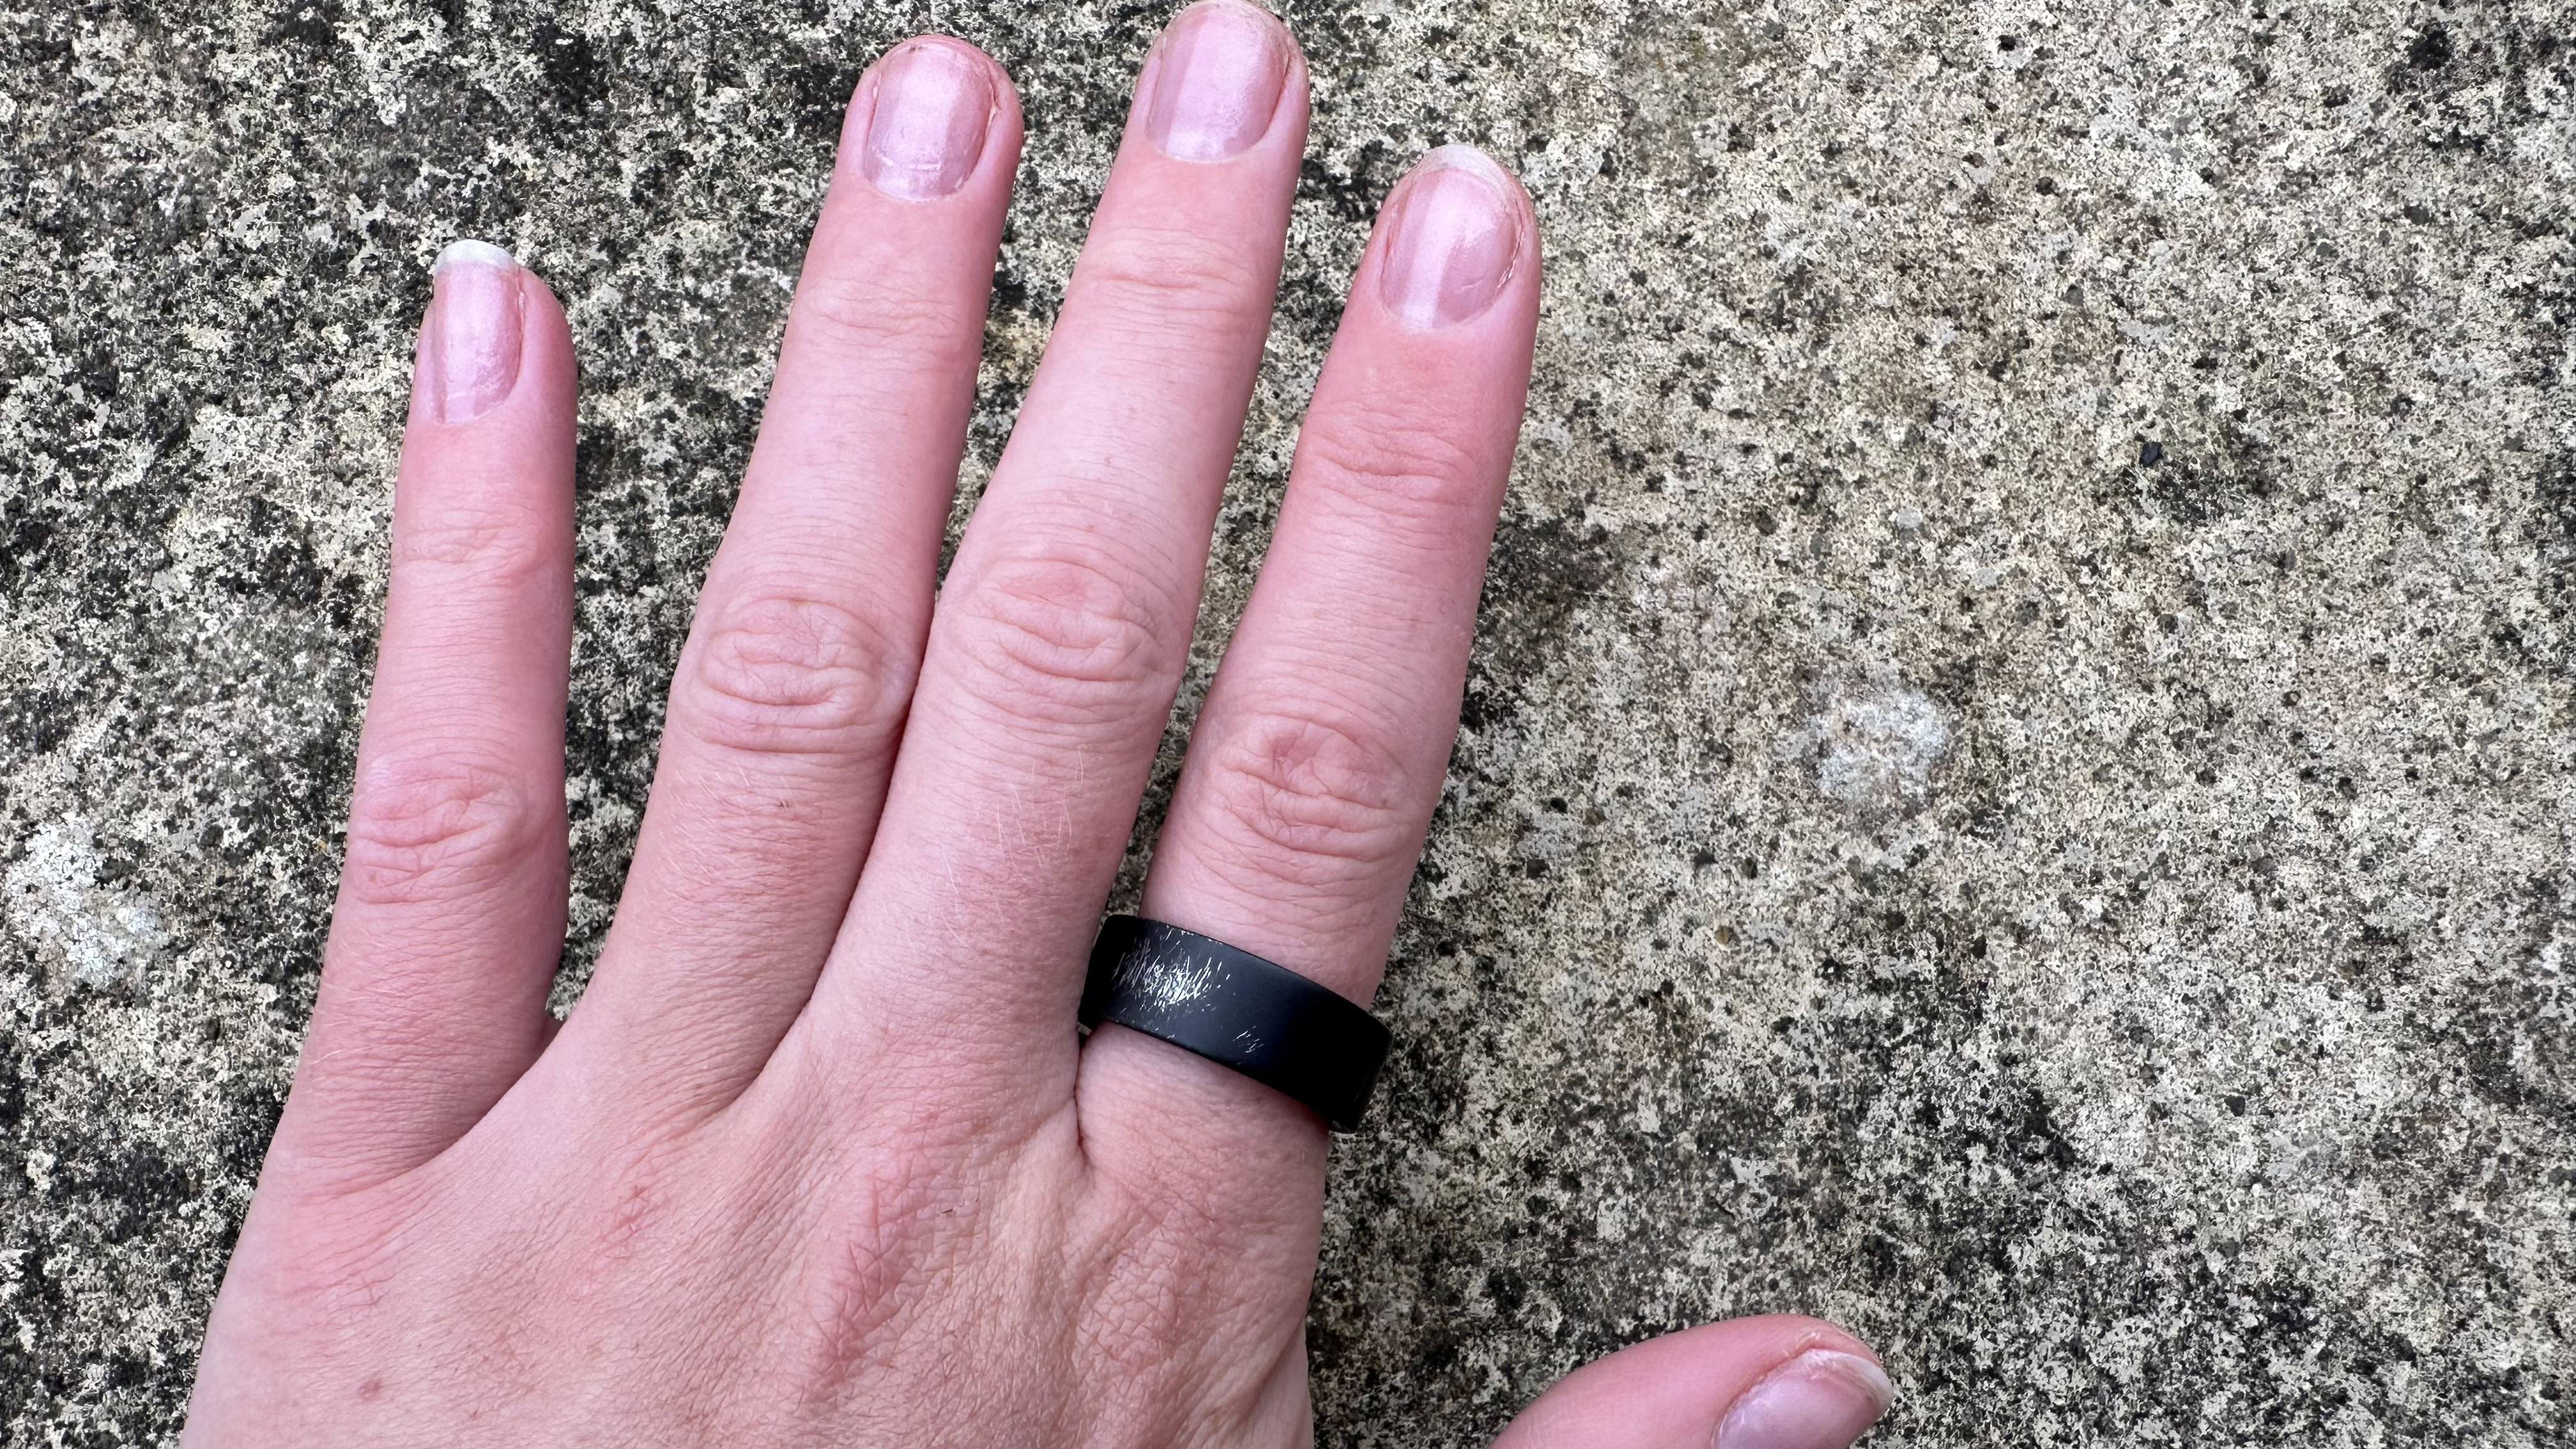 Ultrahuman Ring Air Review: A Subscription-Free Smart Ring